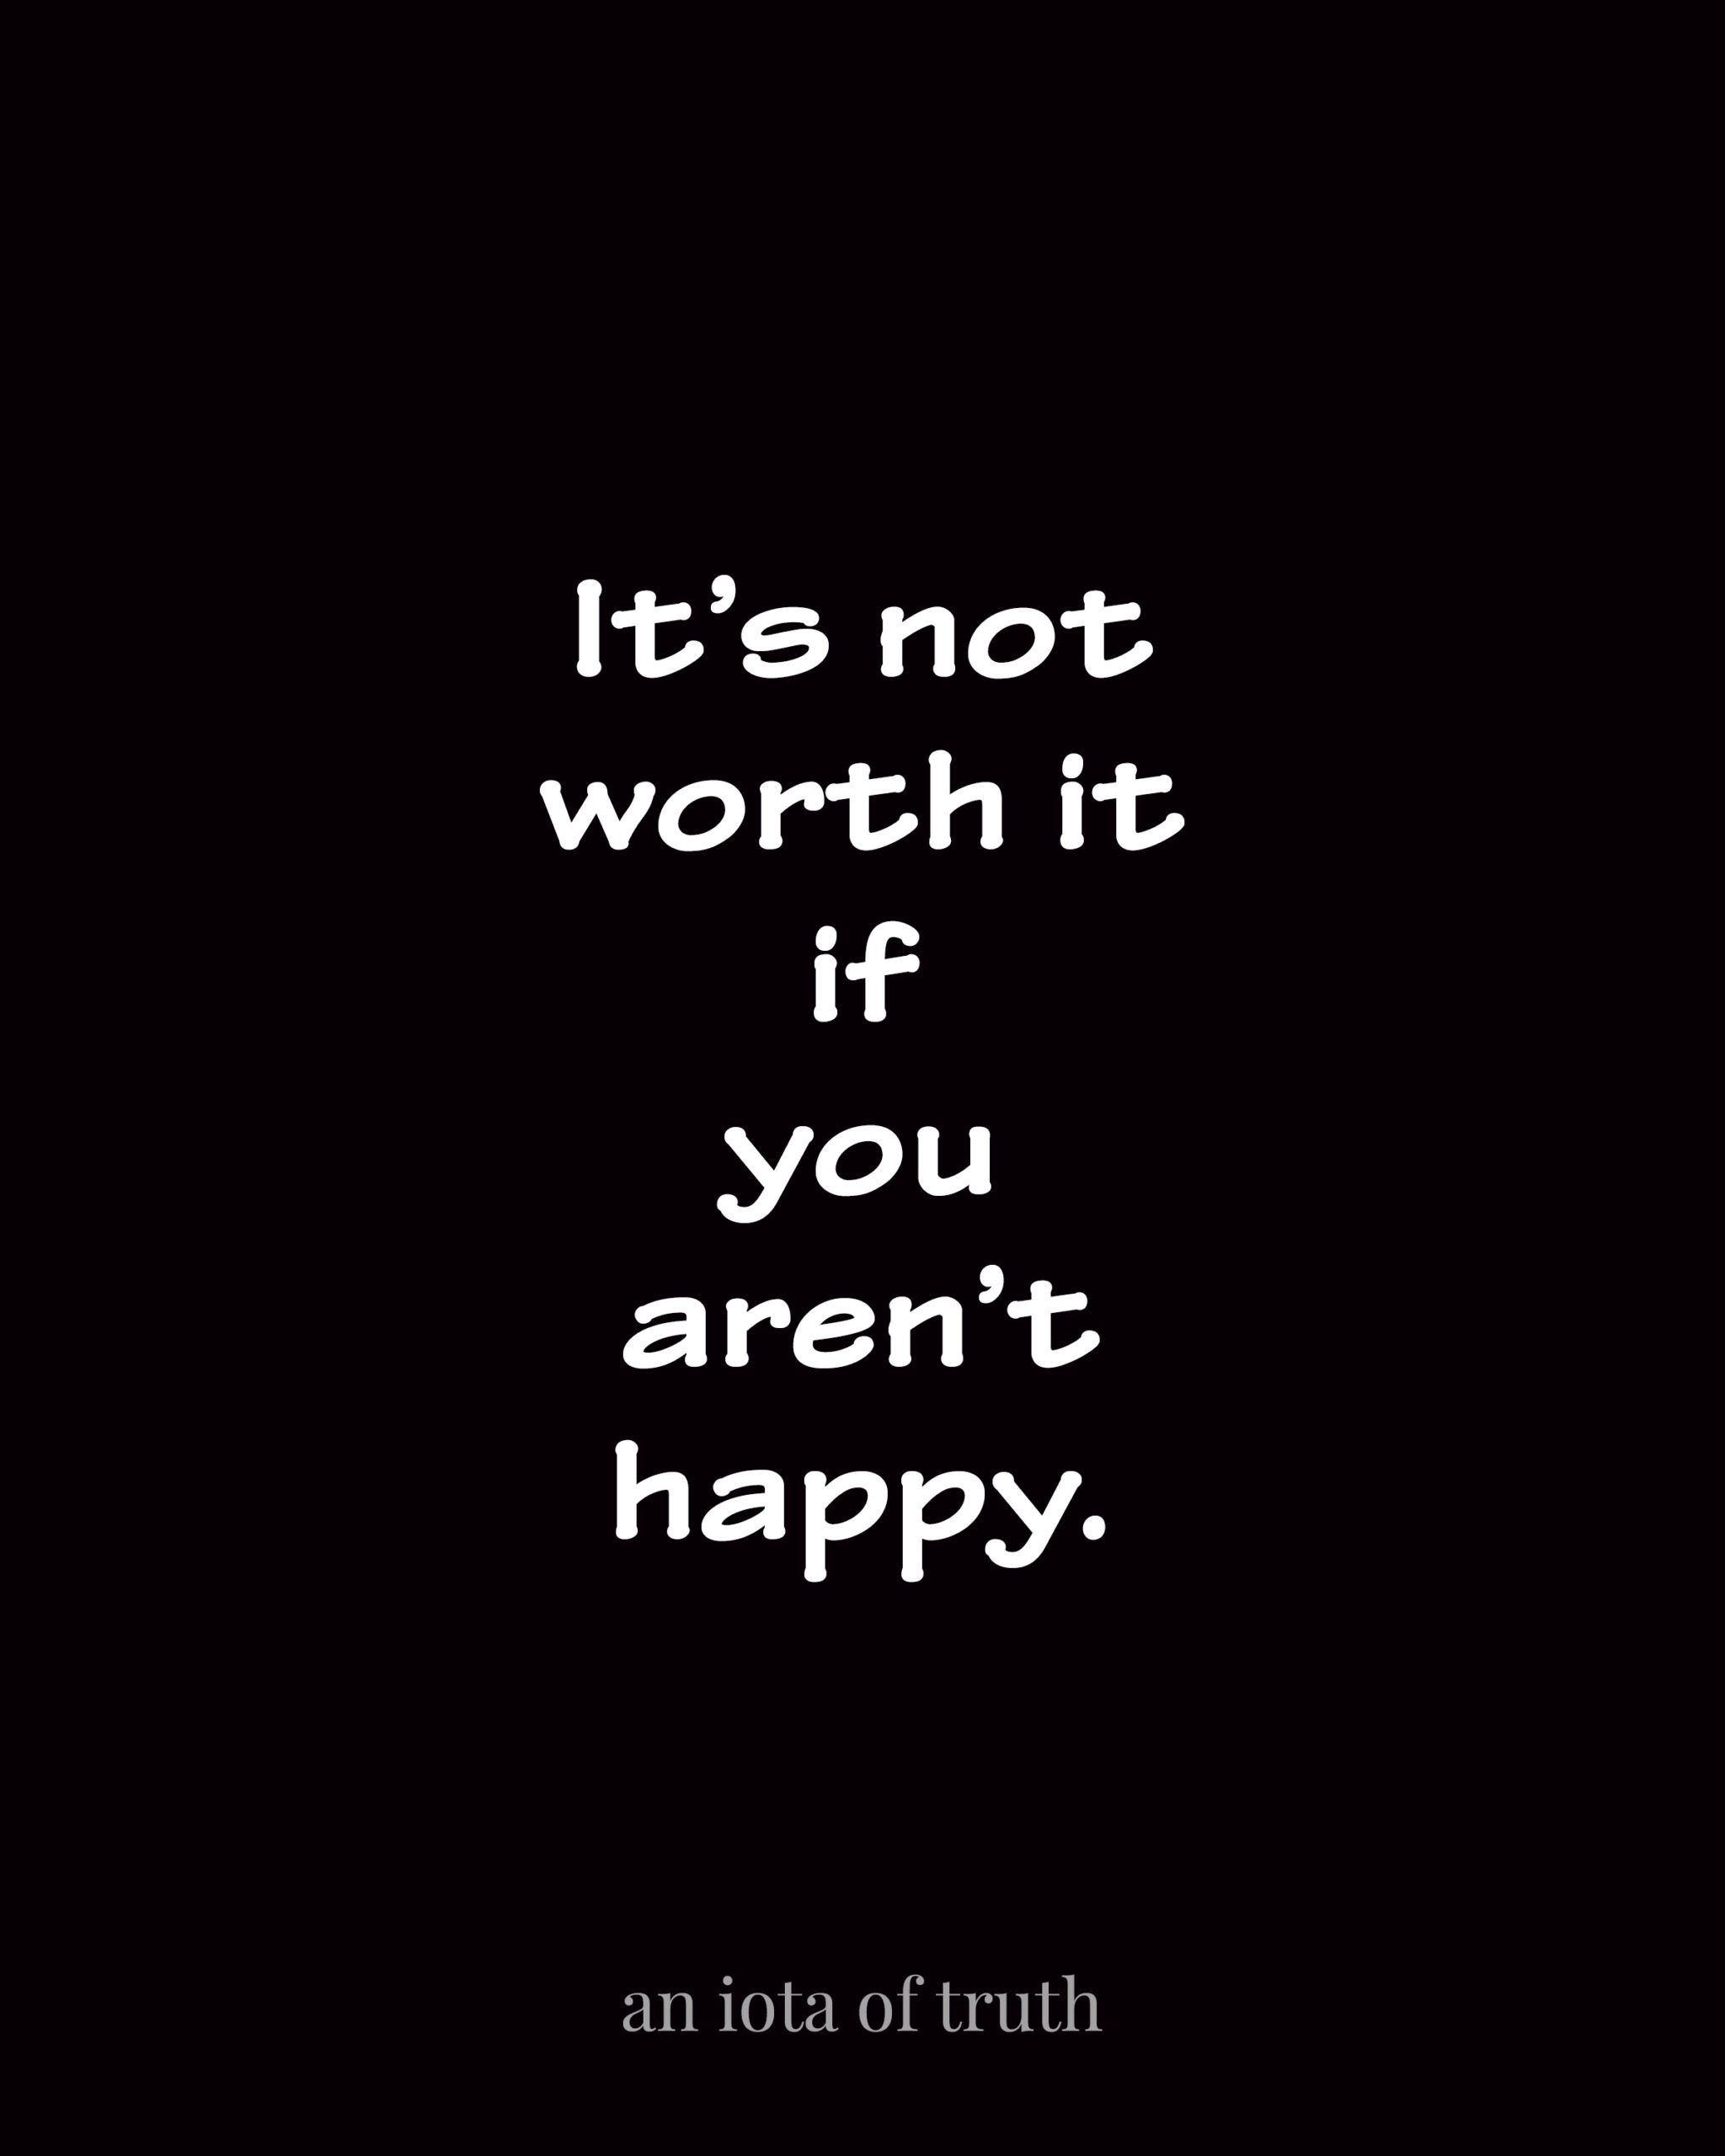 It's not worth it if you aren't happy.